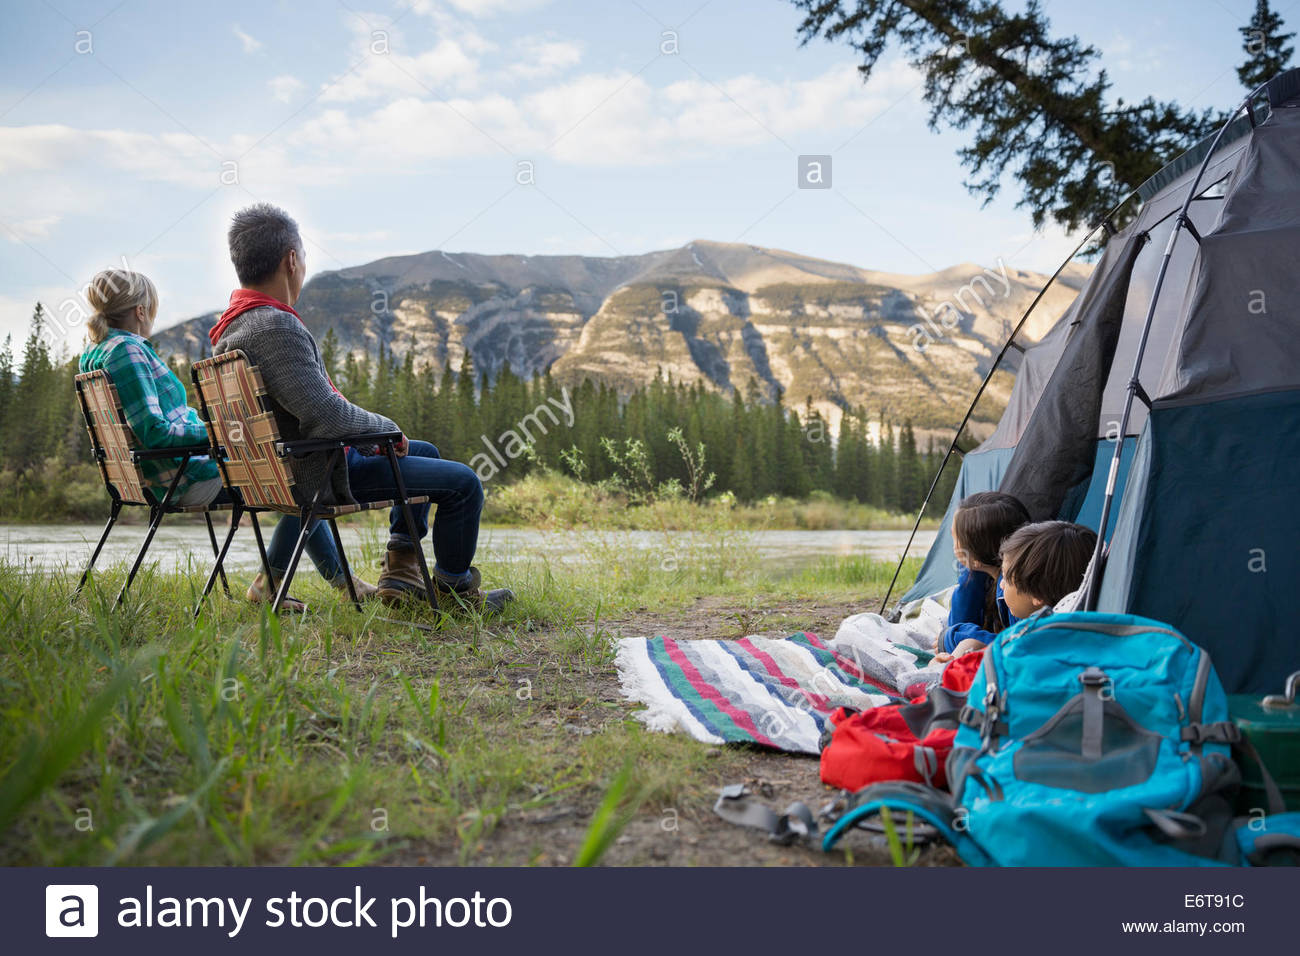 Family admiring view from campsite Stock Photo